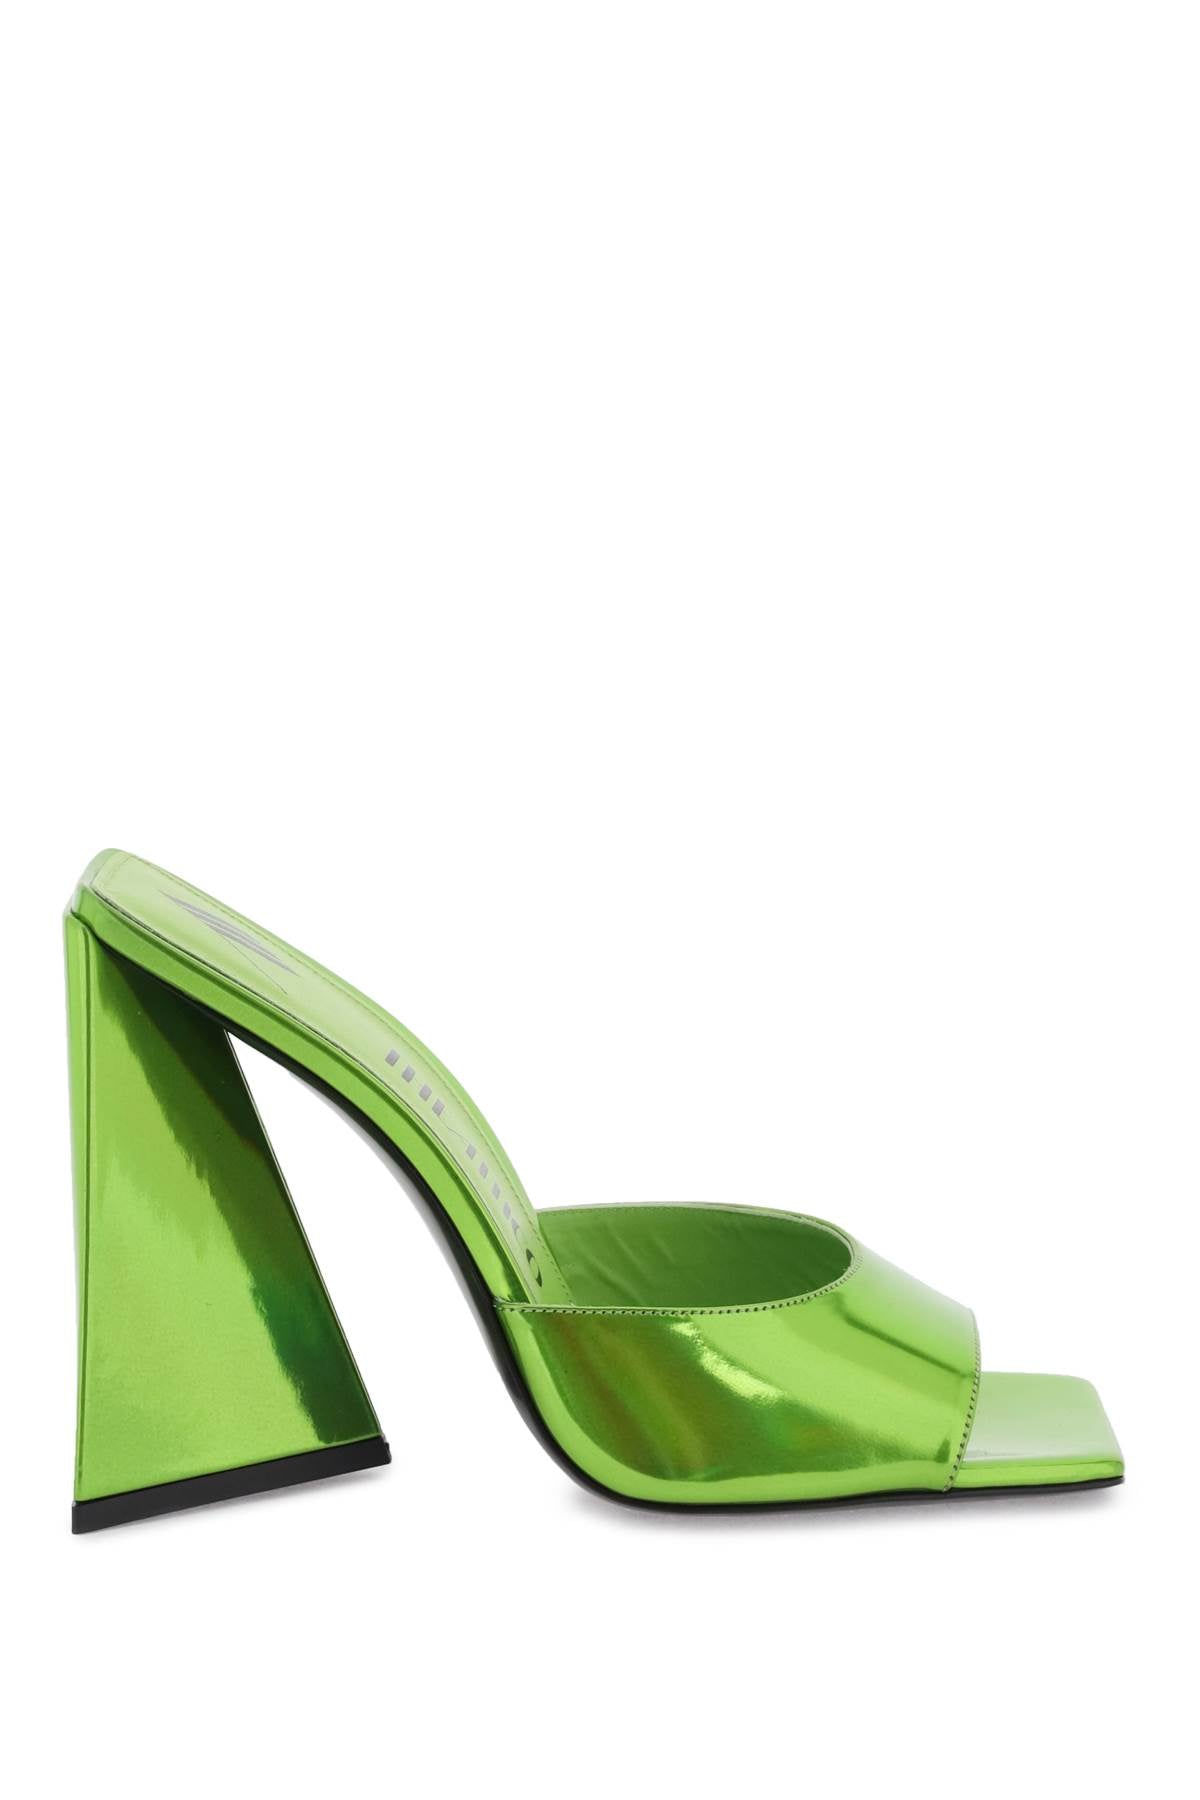 DEVON Flat - Sandals in Laminated Faux Patent Leather for Women